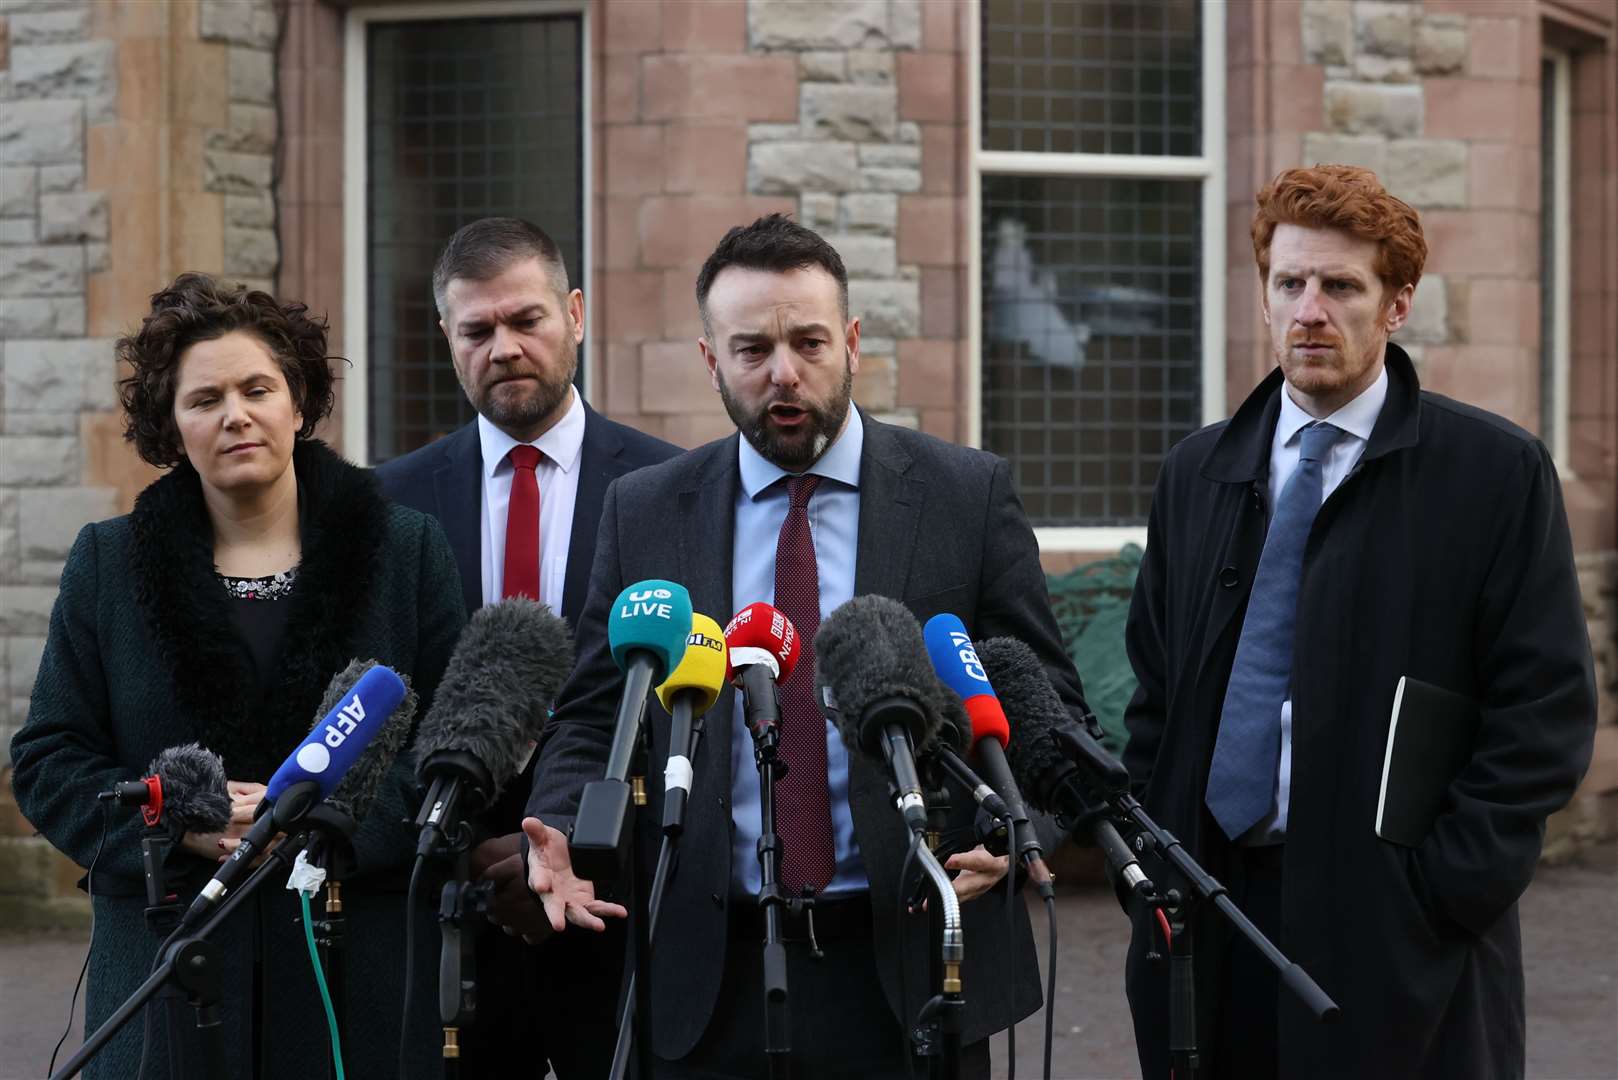 SDLP leader Colum Eastwood (centre) and party colleagues met with Rishi Sunak on Friday morning (Liam McBurney/PA)